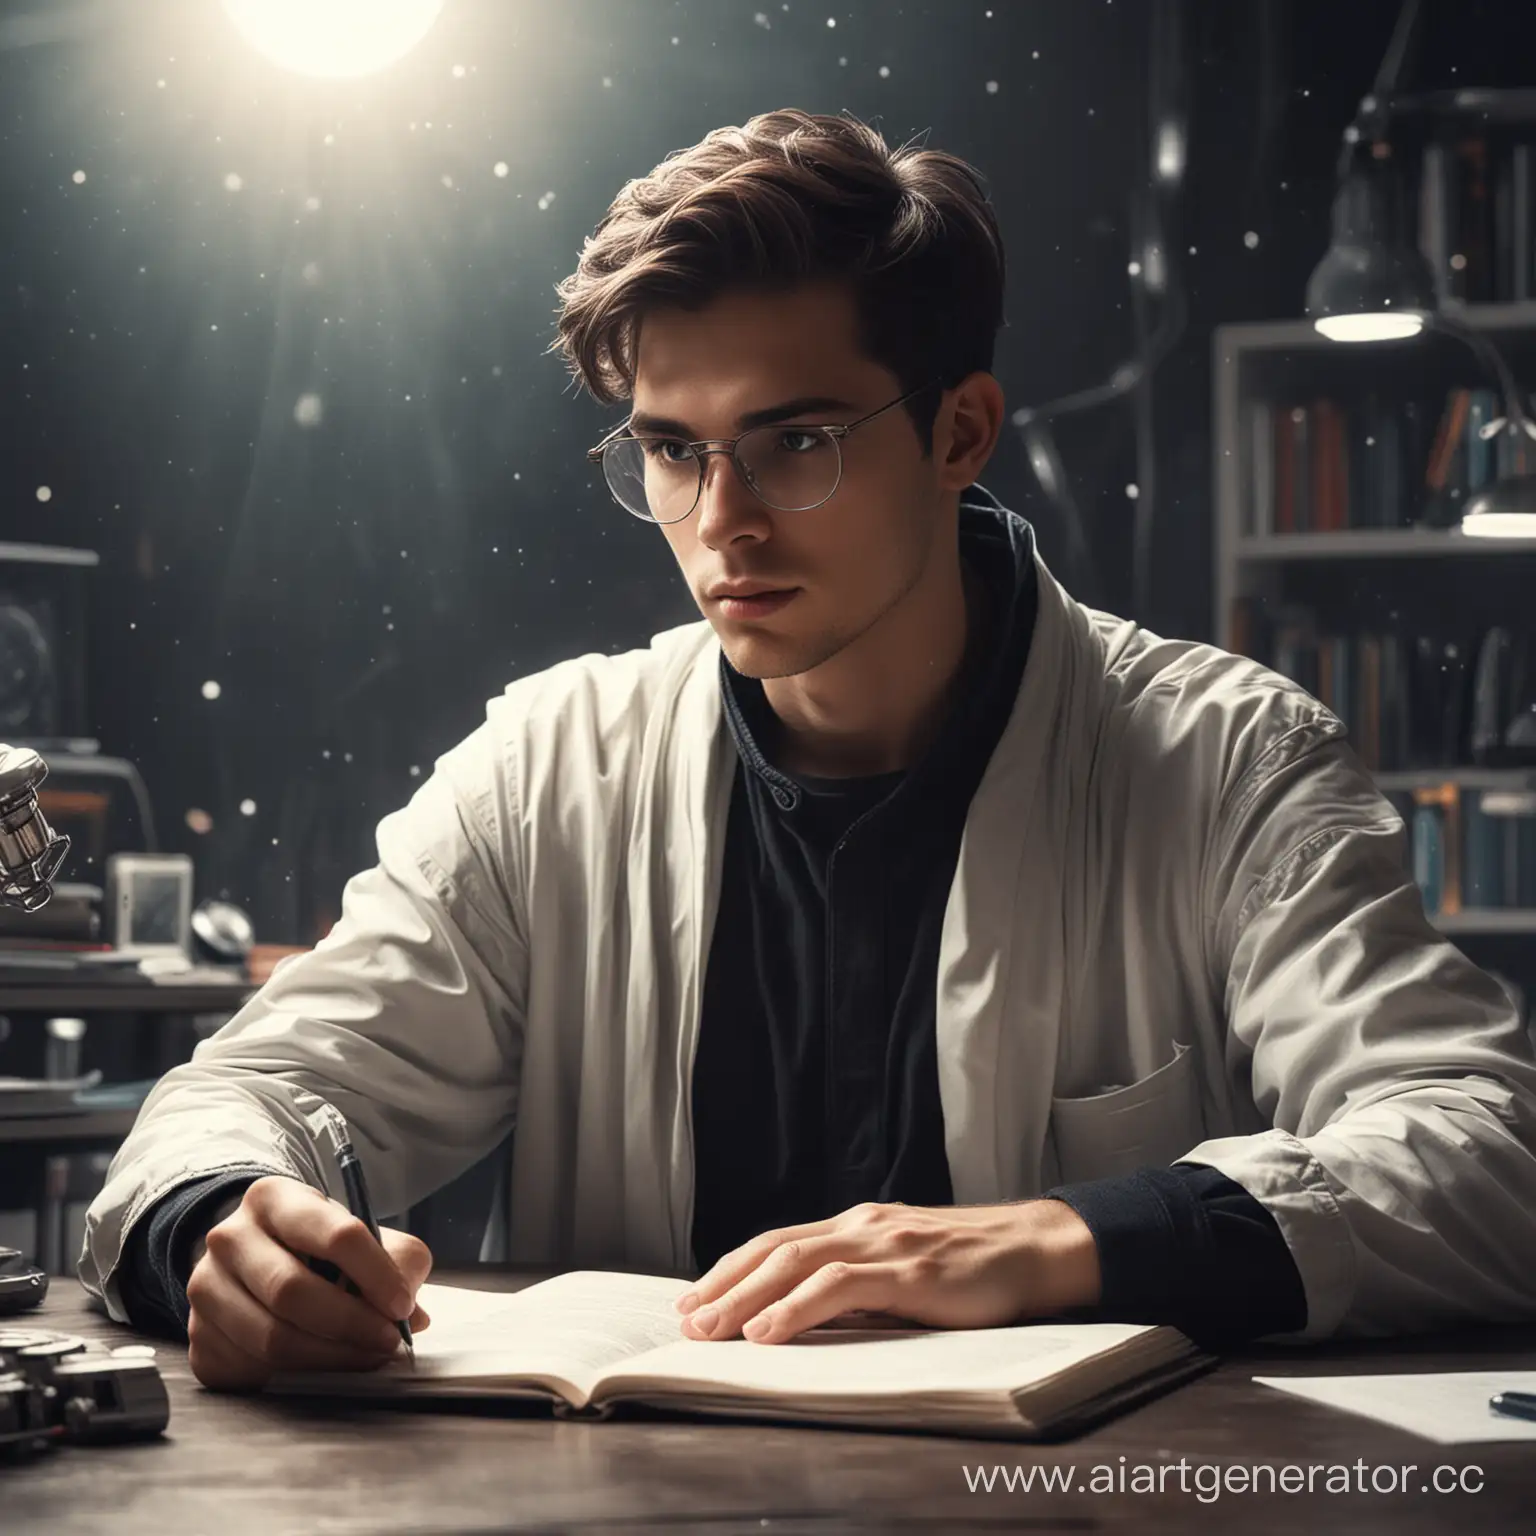 Young-Man-Writing-Science-Fiction-Inspired-Literature